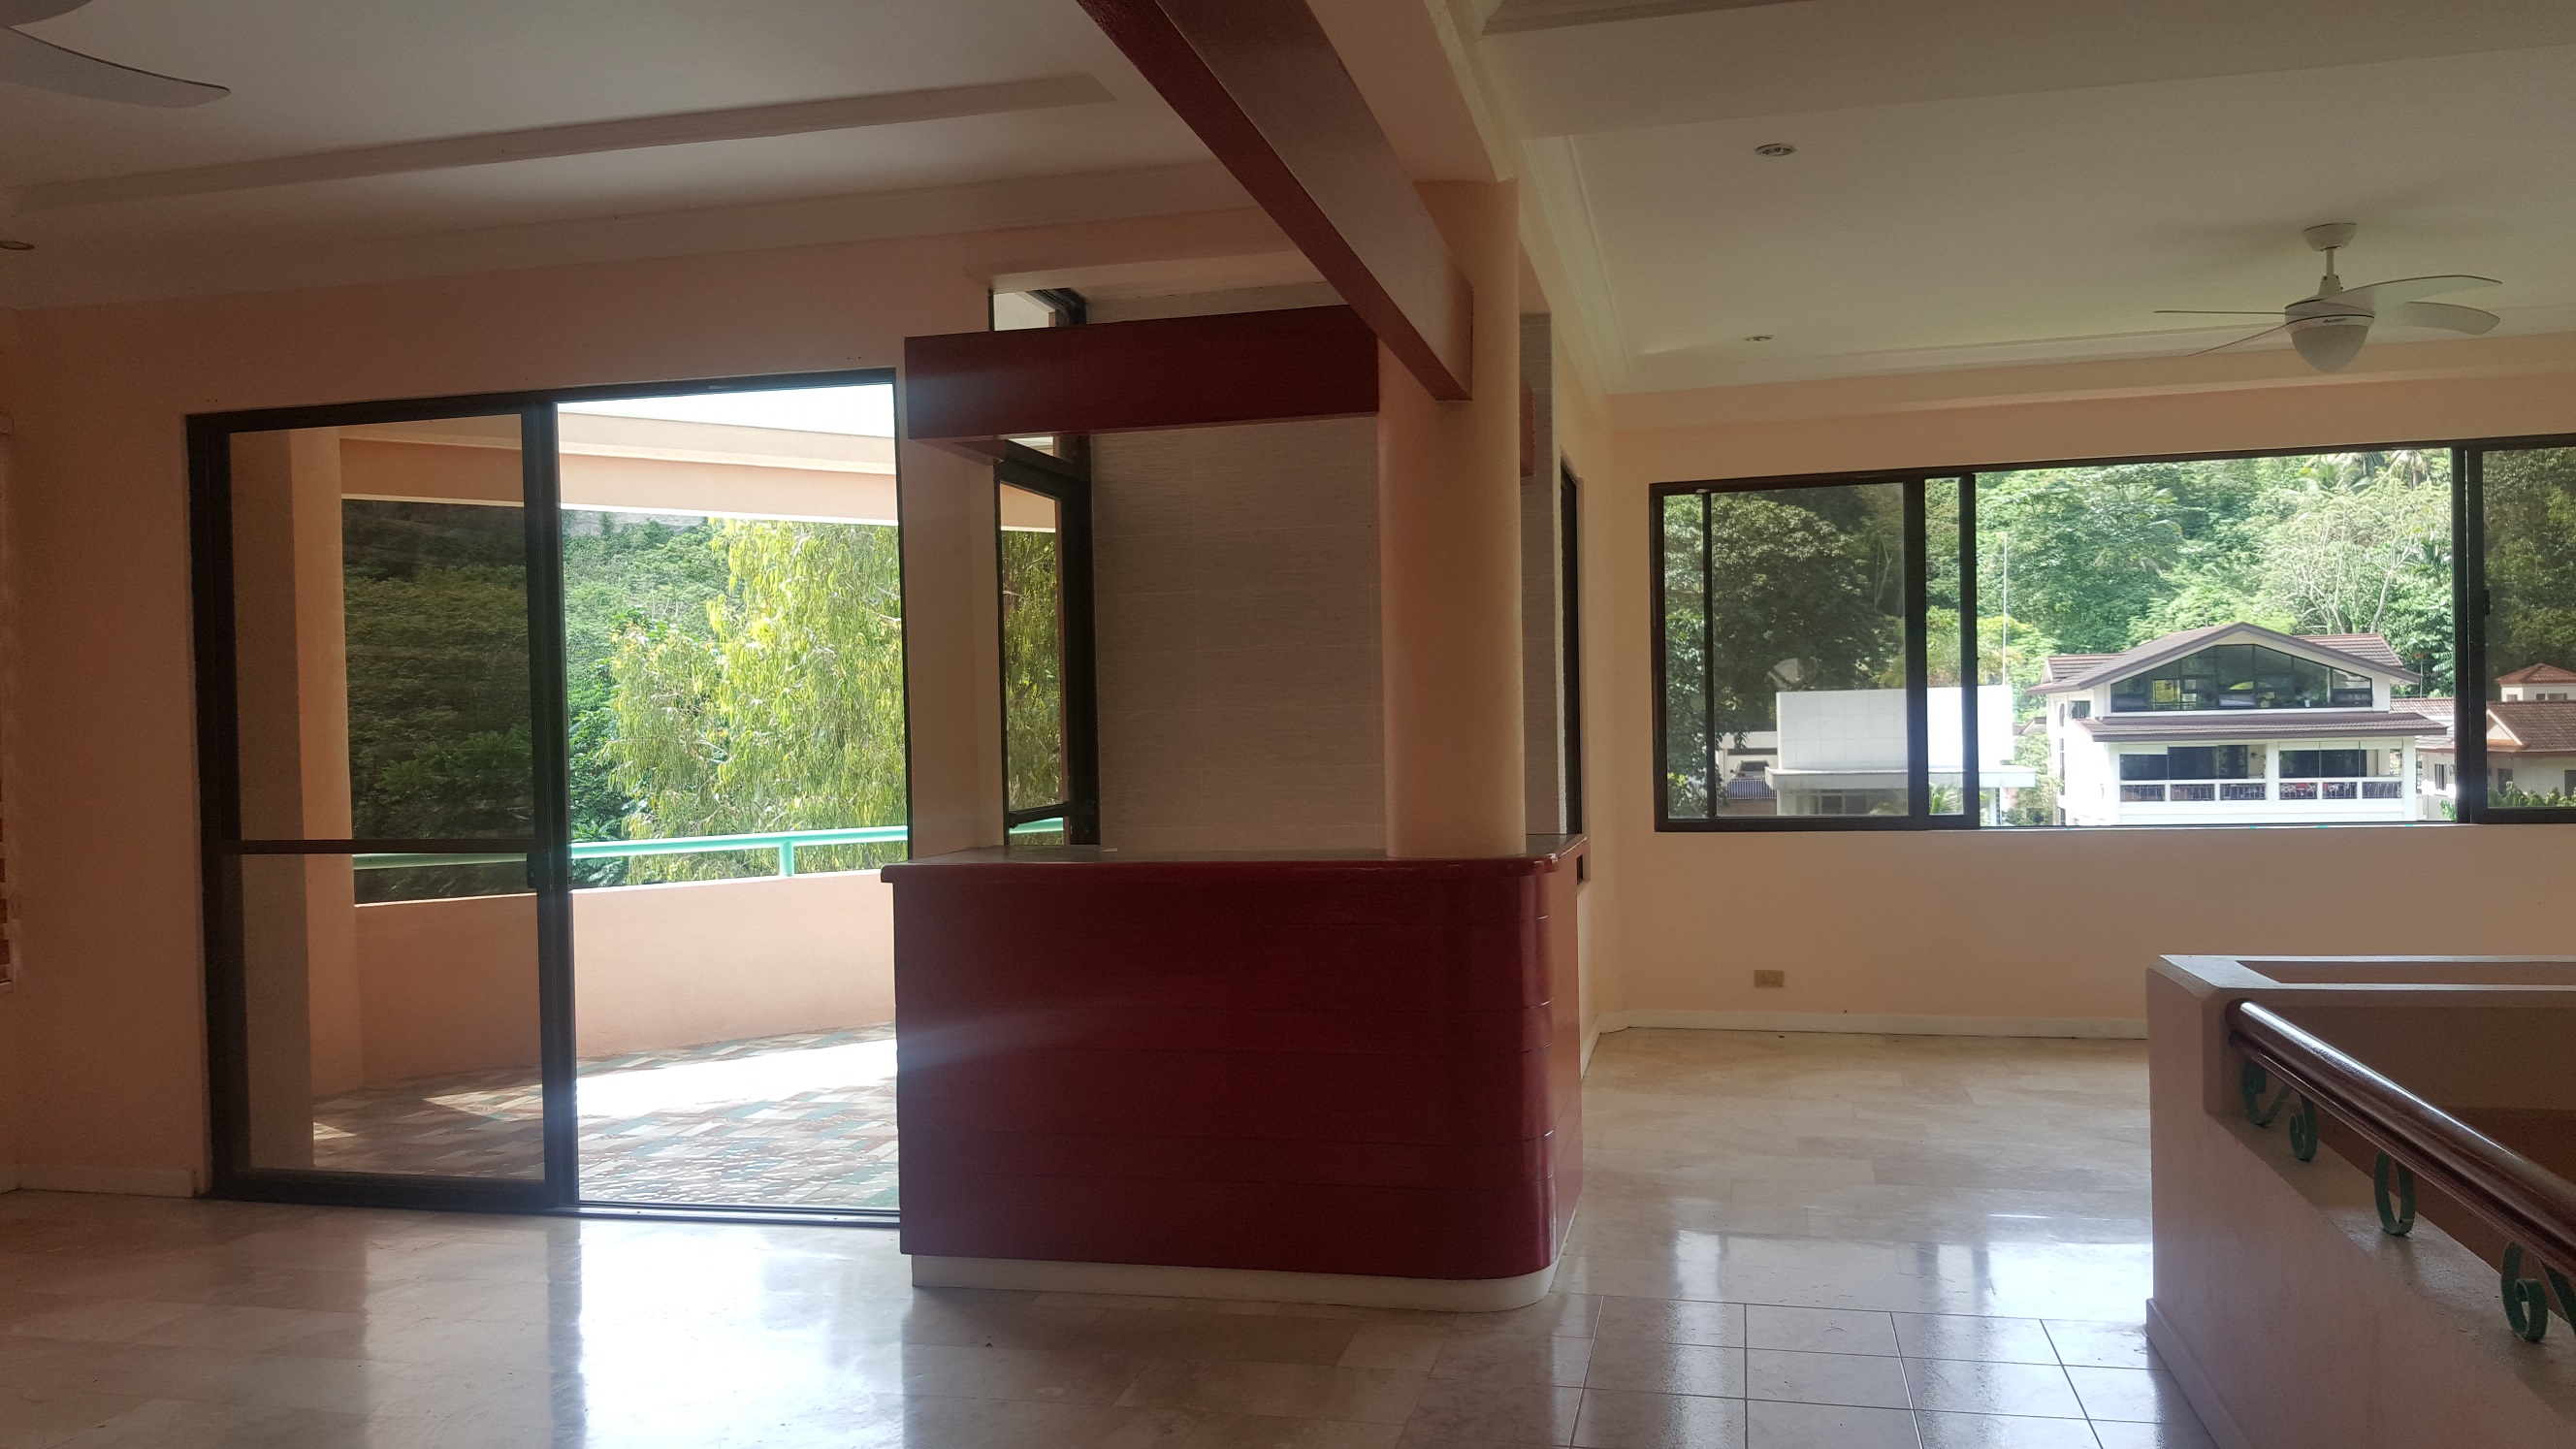 3-storey-house-with-5-bedrooms-located-in-banilad-cebu-city